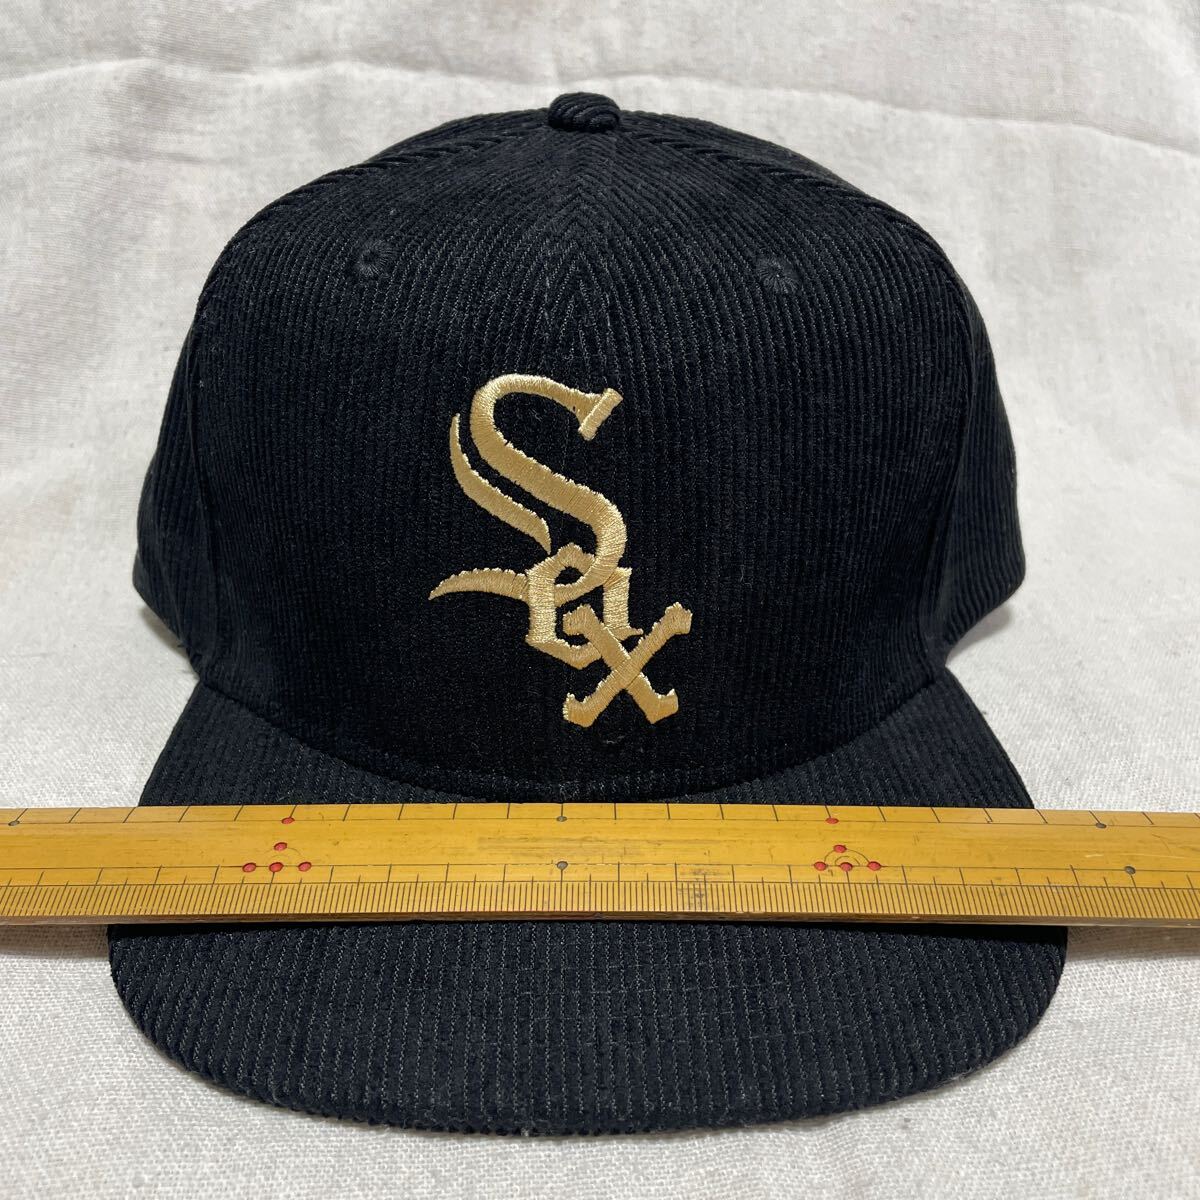 MLB WHITE SOX スナップバックキャップ キャップ アメフト 帽子 sports specialities NWA ICE CUBE hip hop music _画像6